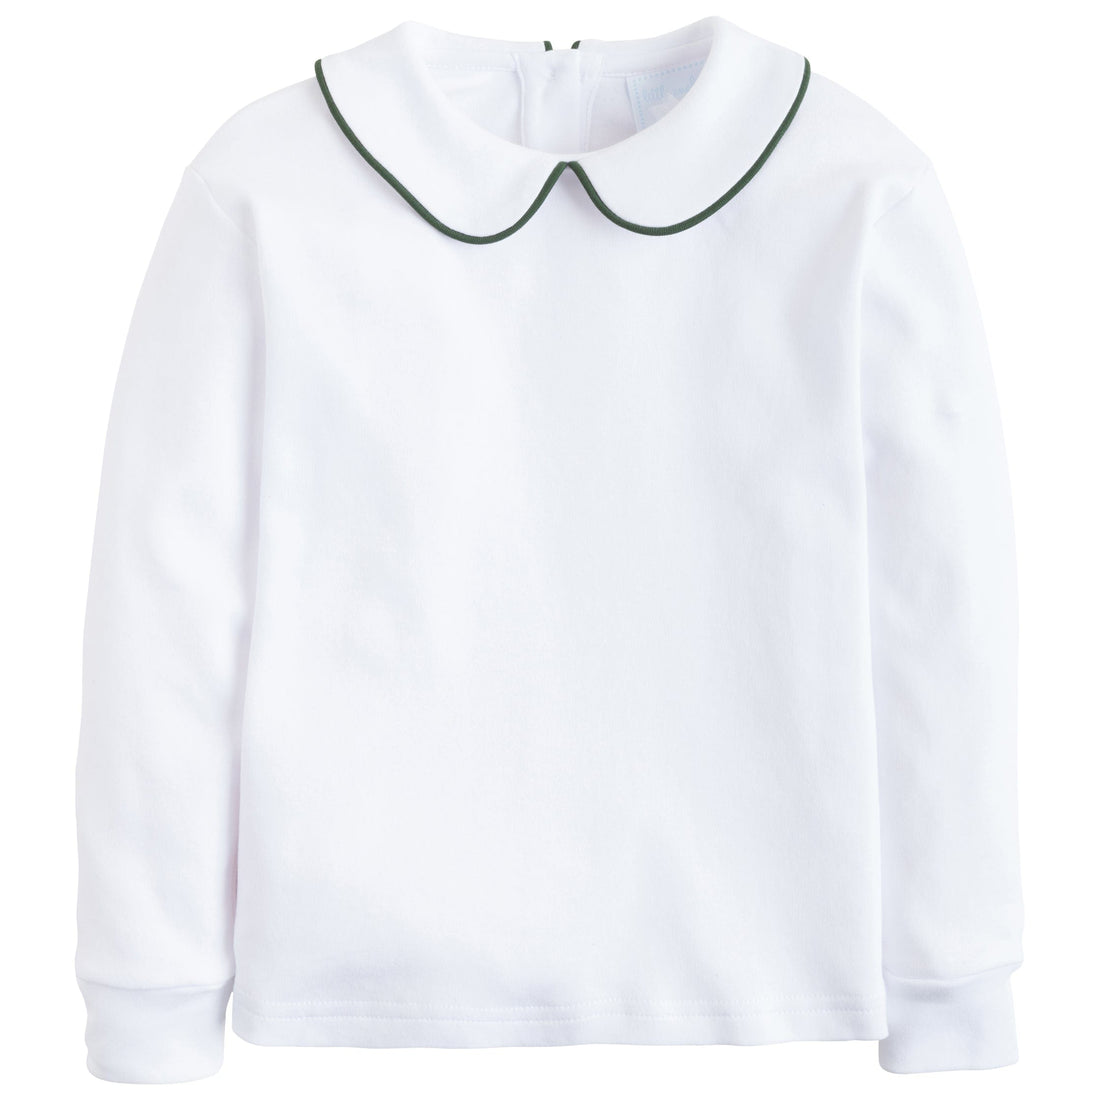 little english classic childrens clothing boys white shirt with peter pan collar and hunter green piping on the collar